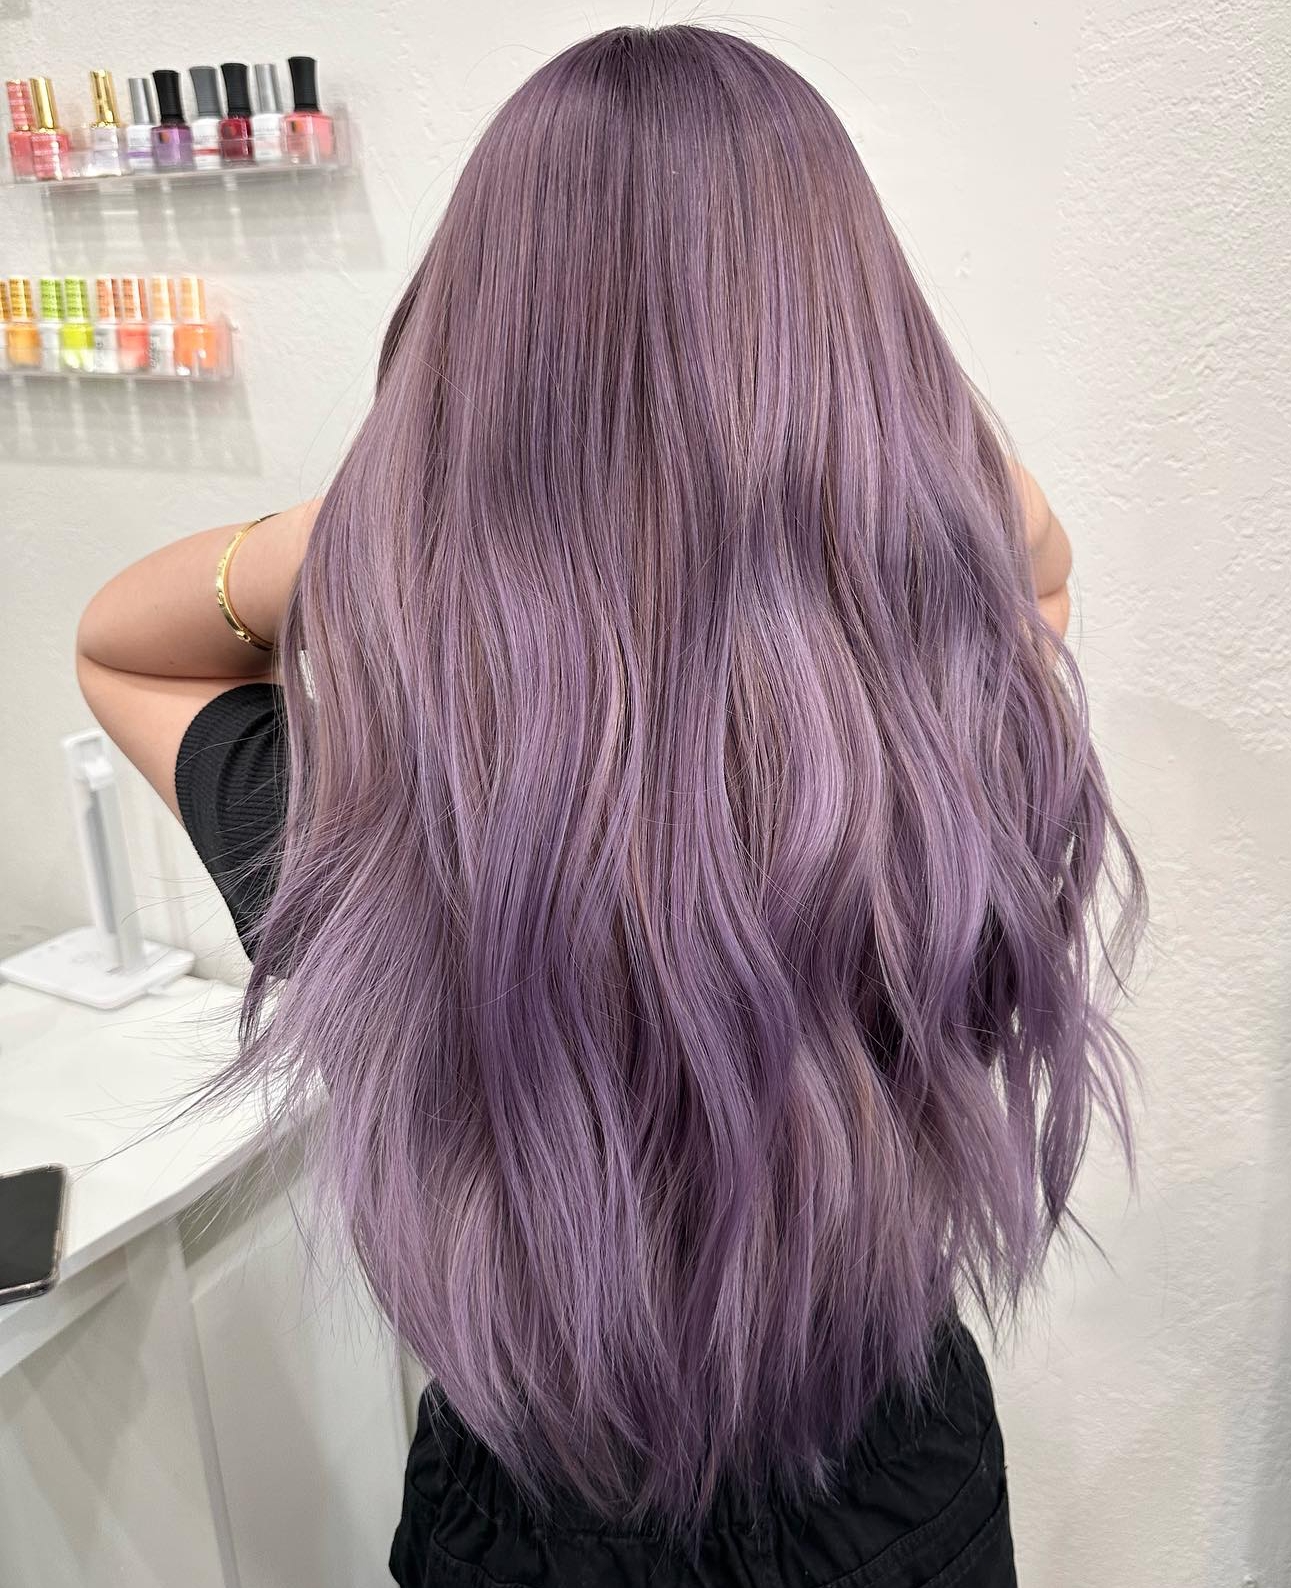 Dusty Lavender Color on Long Straight Hair